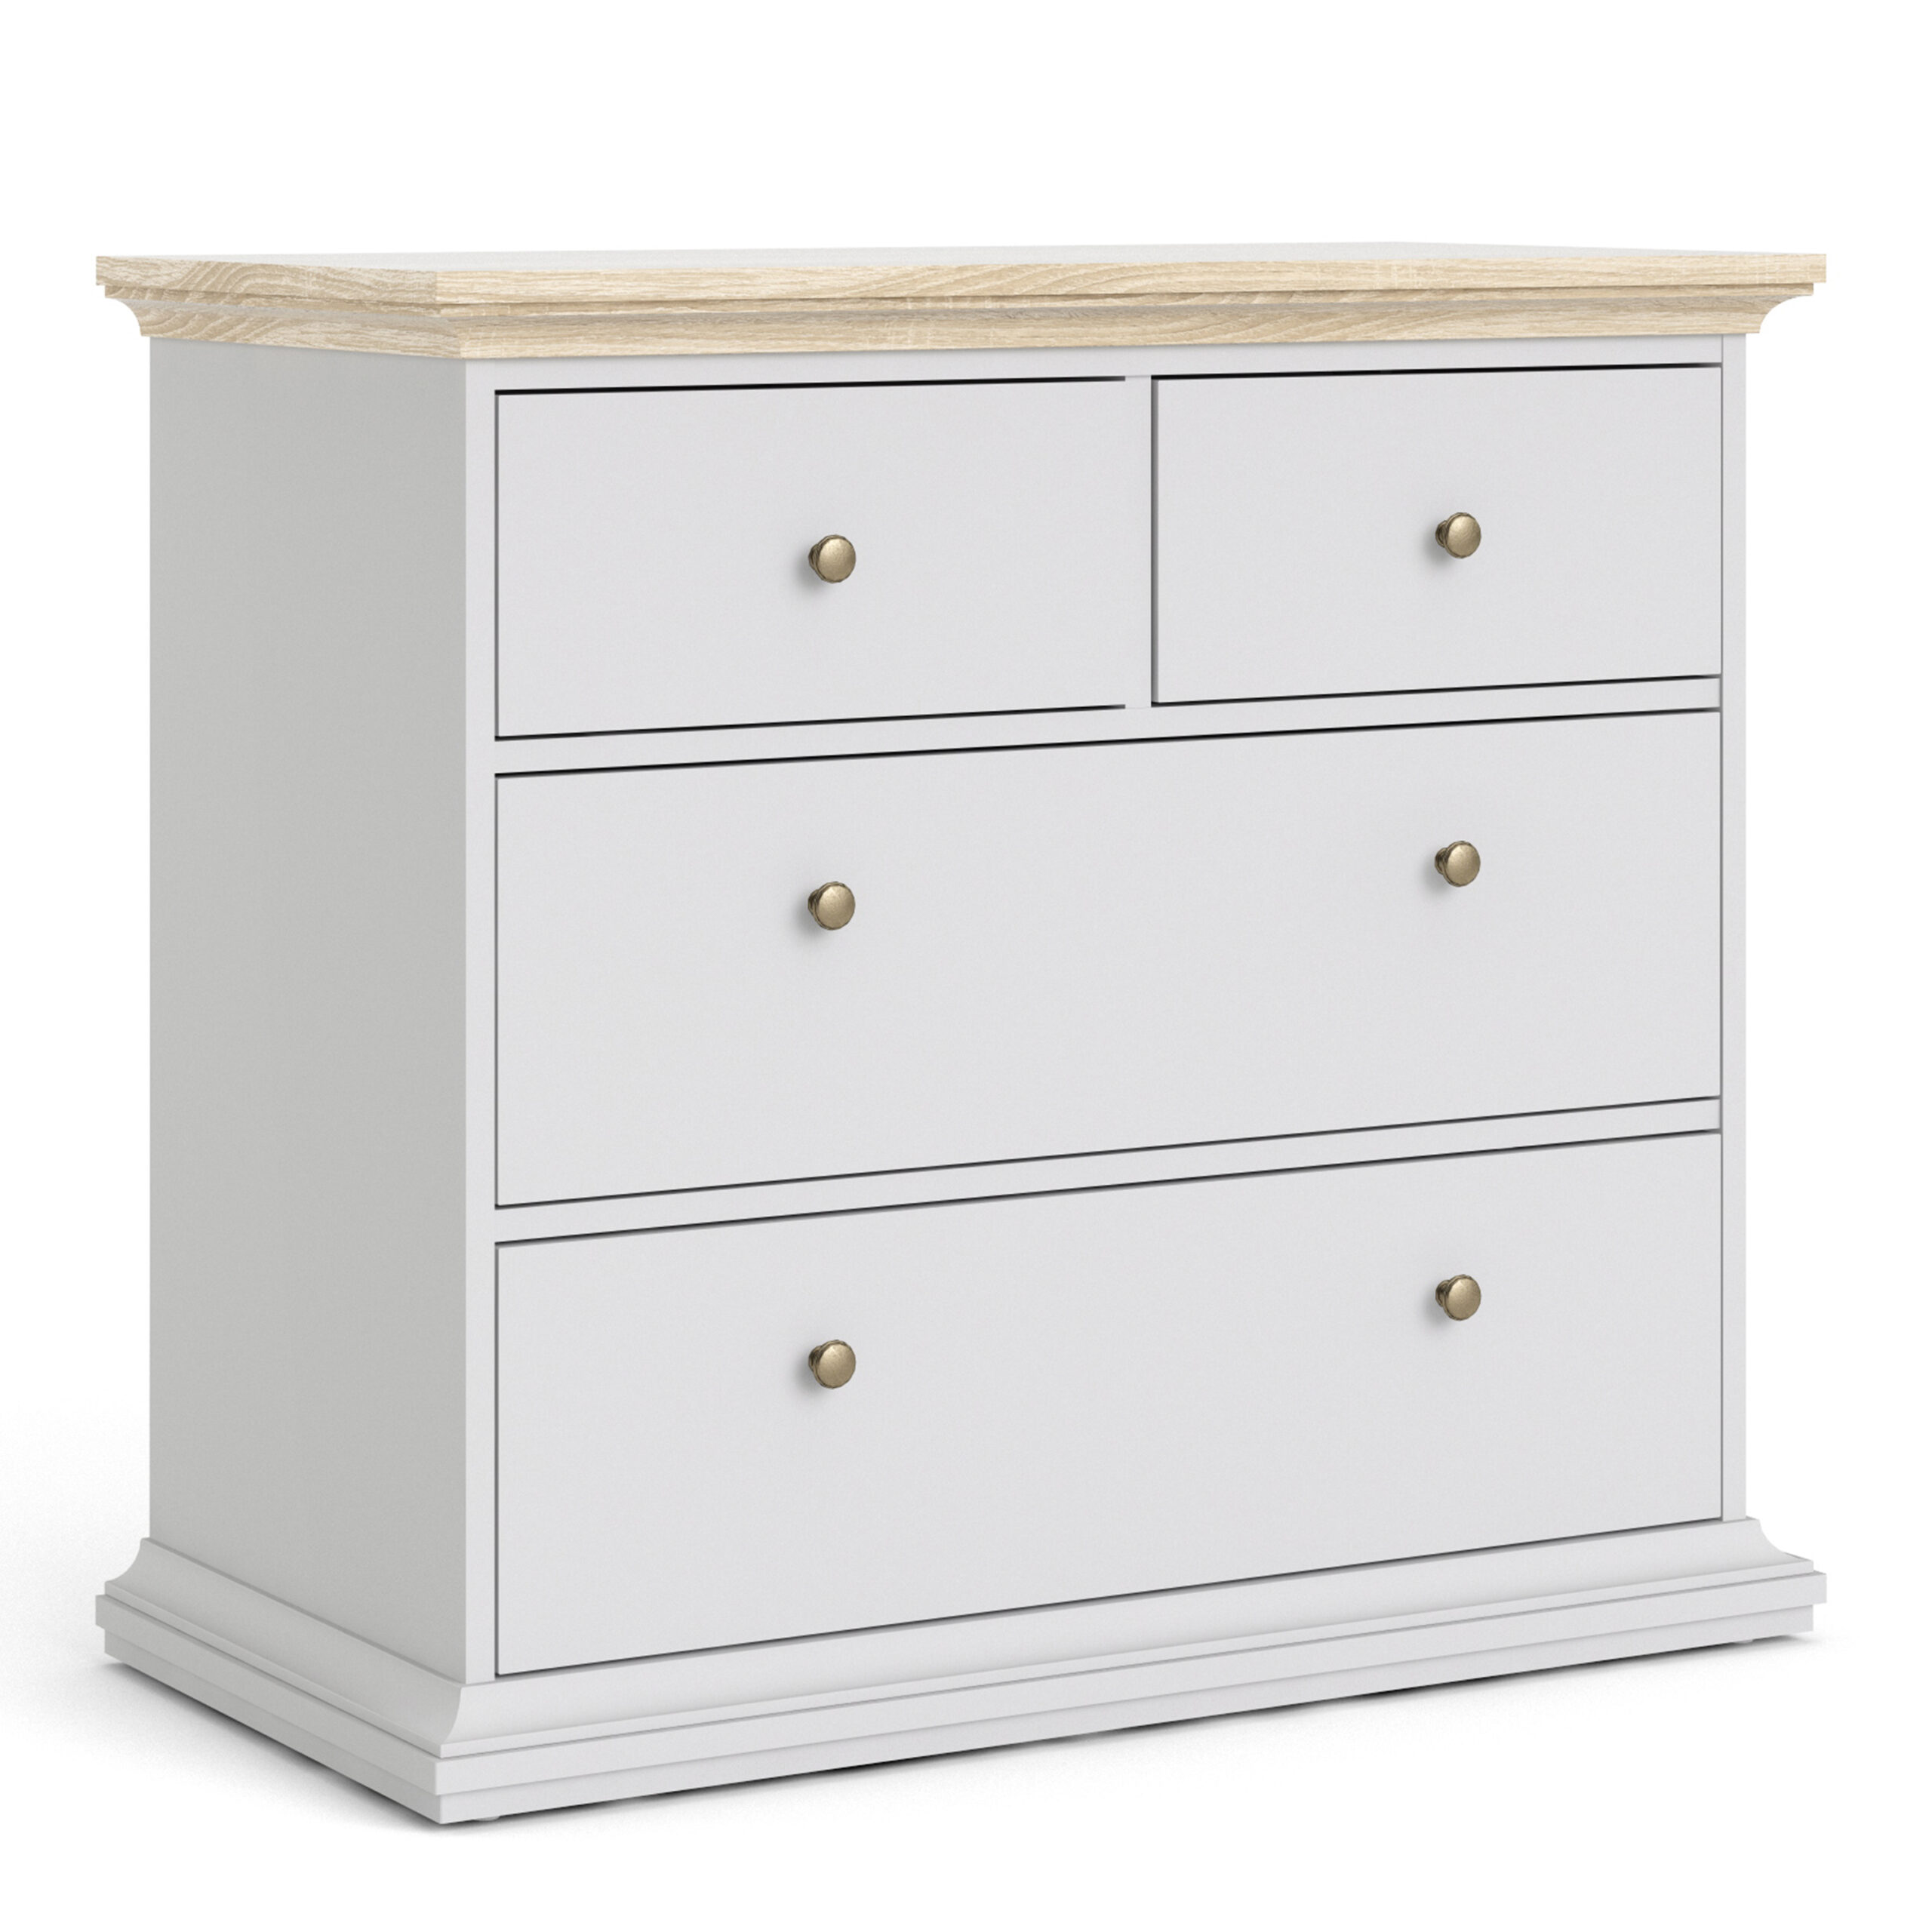 Party Chest Of 4 Drawers In White Oak